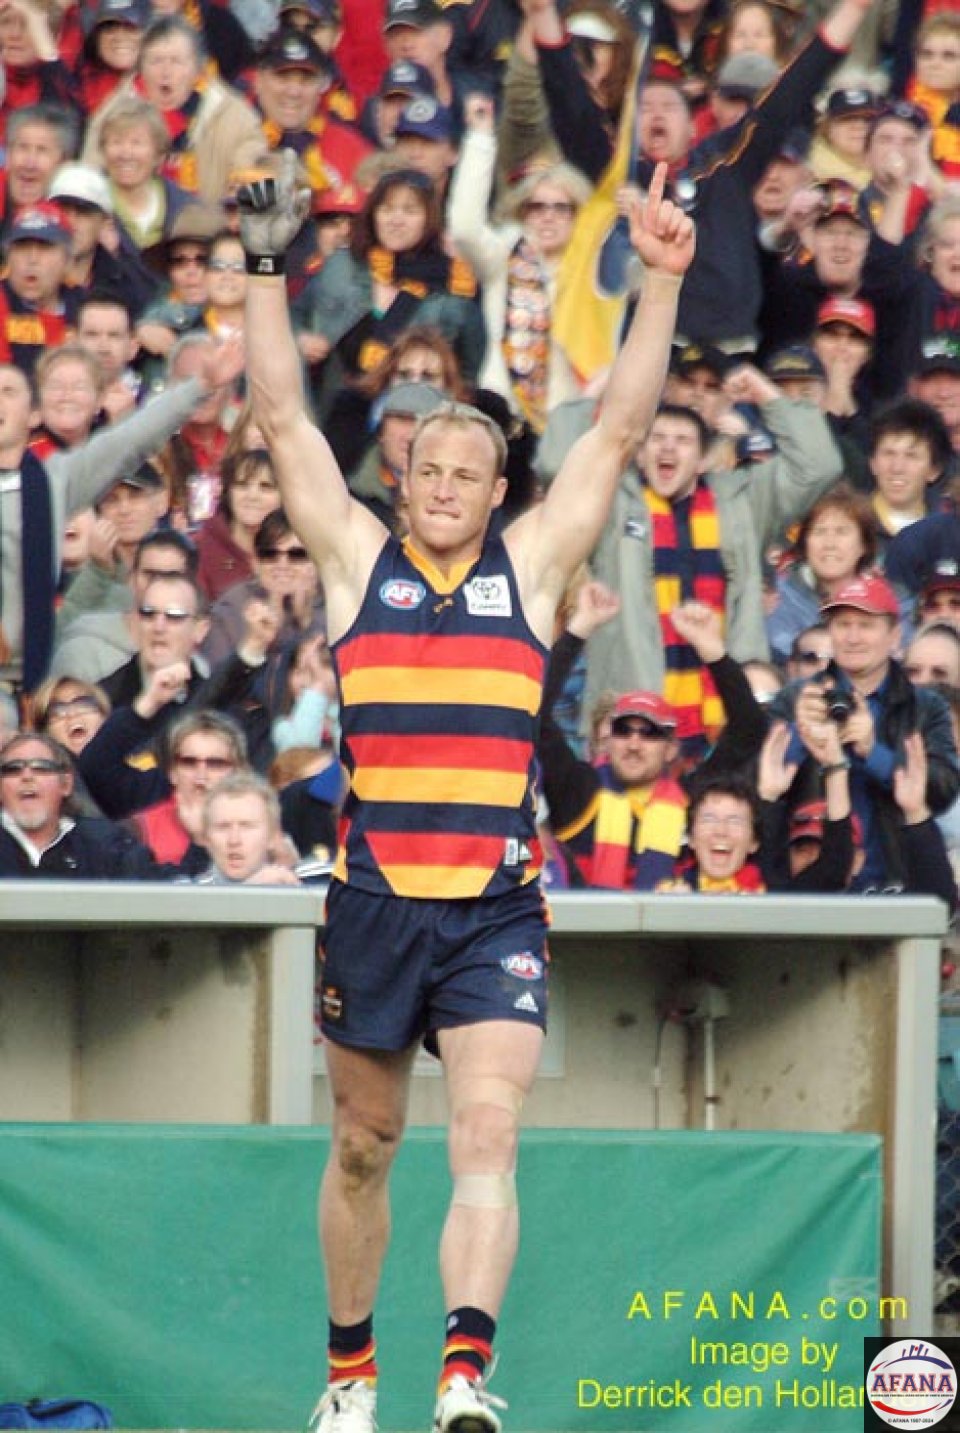 [b]Adelaide Crows forward Ian Perrie celebrates another goal[/b]